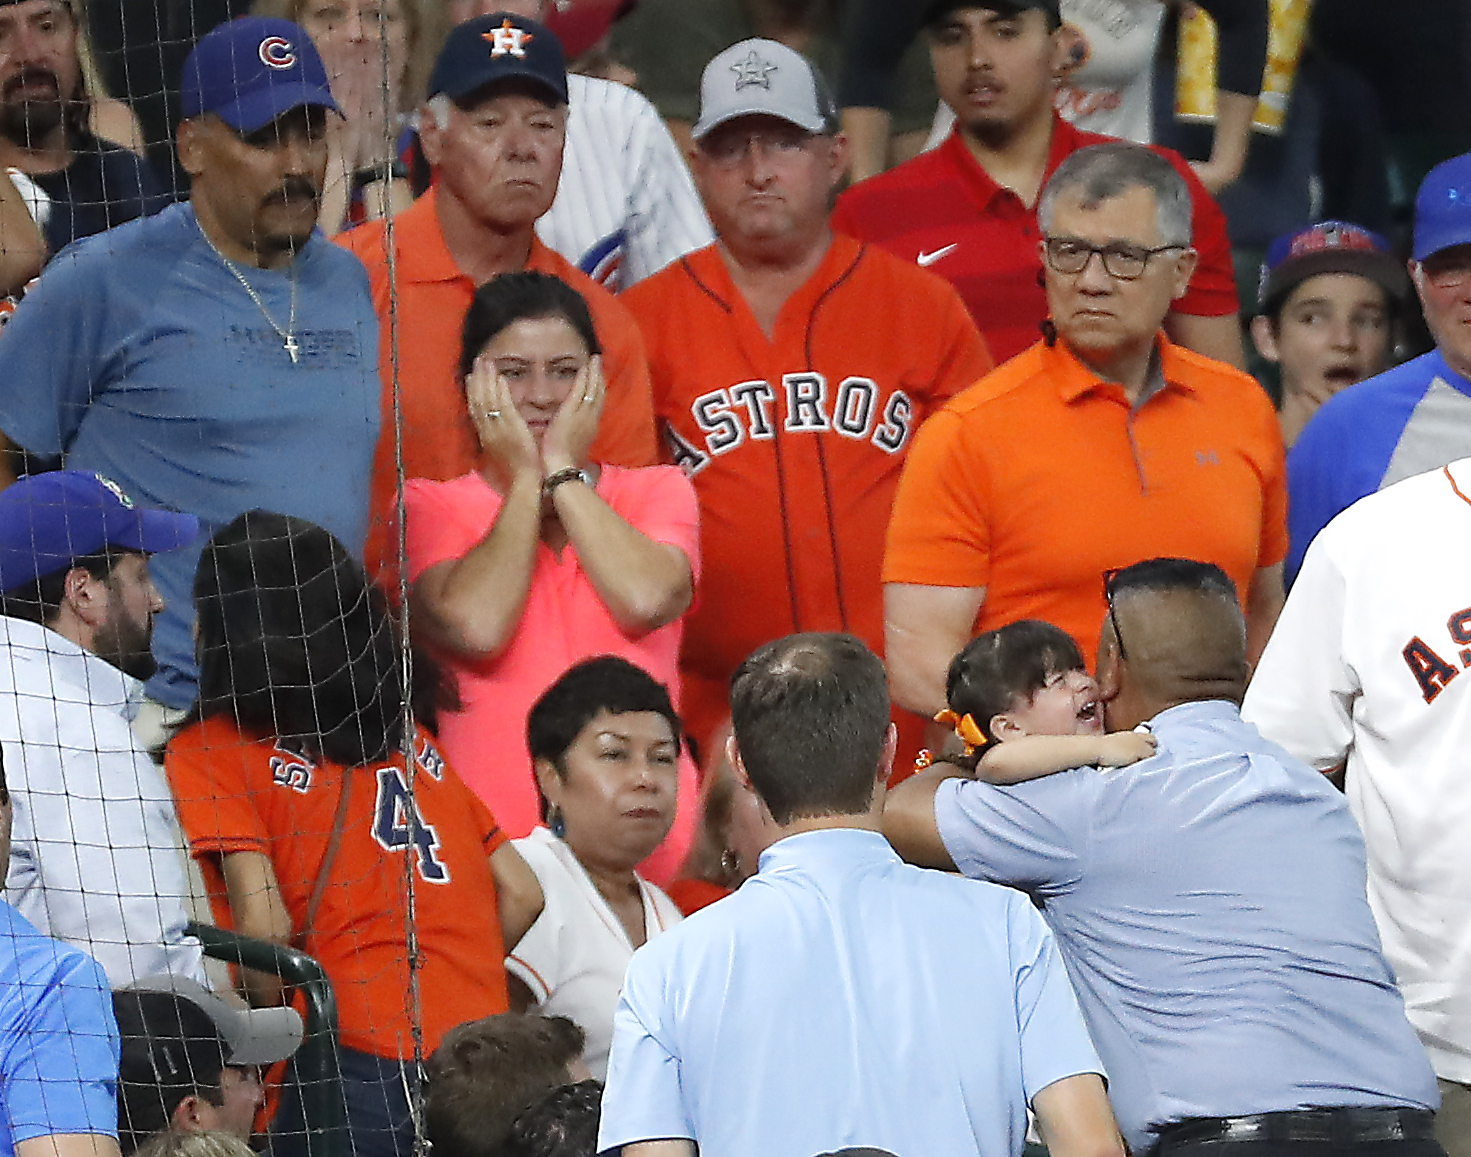 Young girl who was struck by foul ball at Astros game recovering in  hospital 